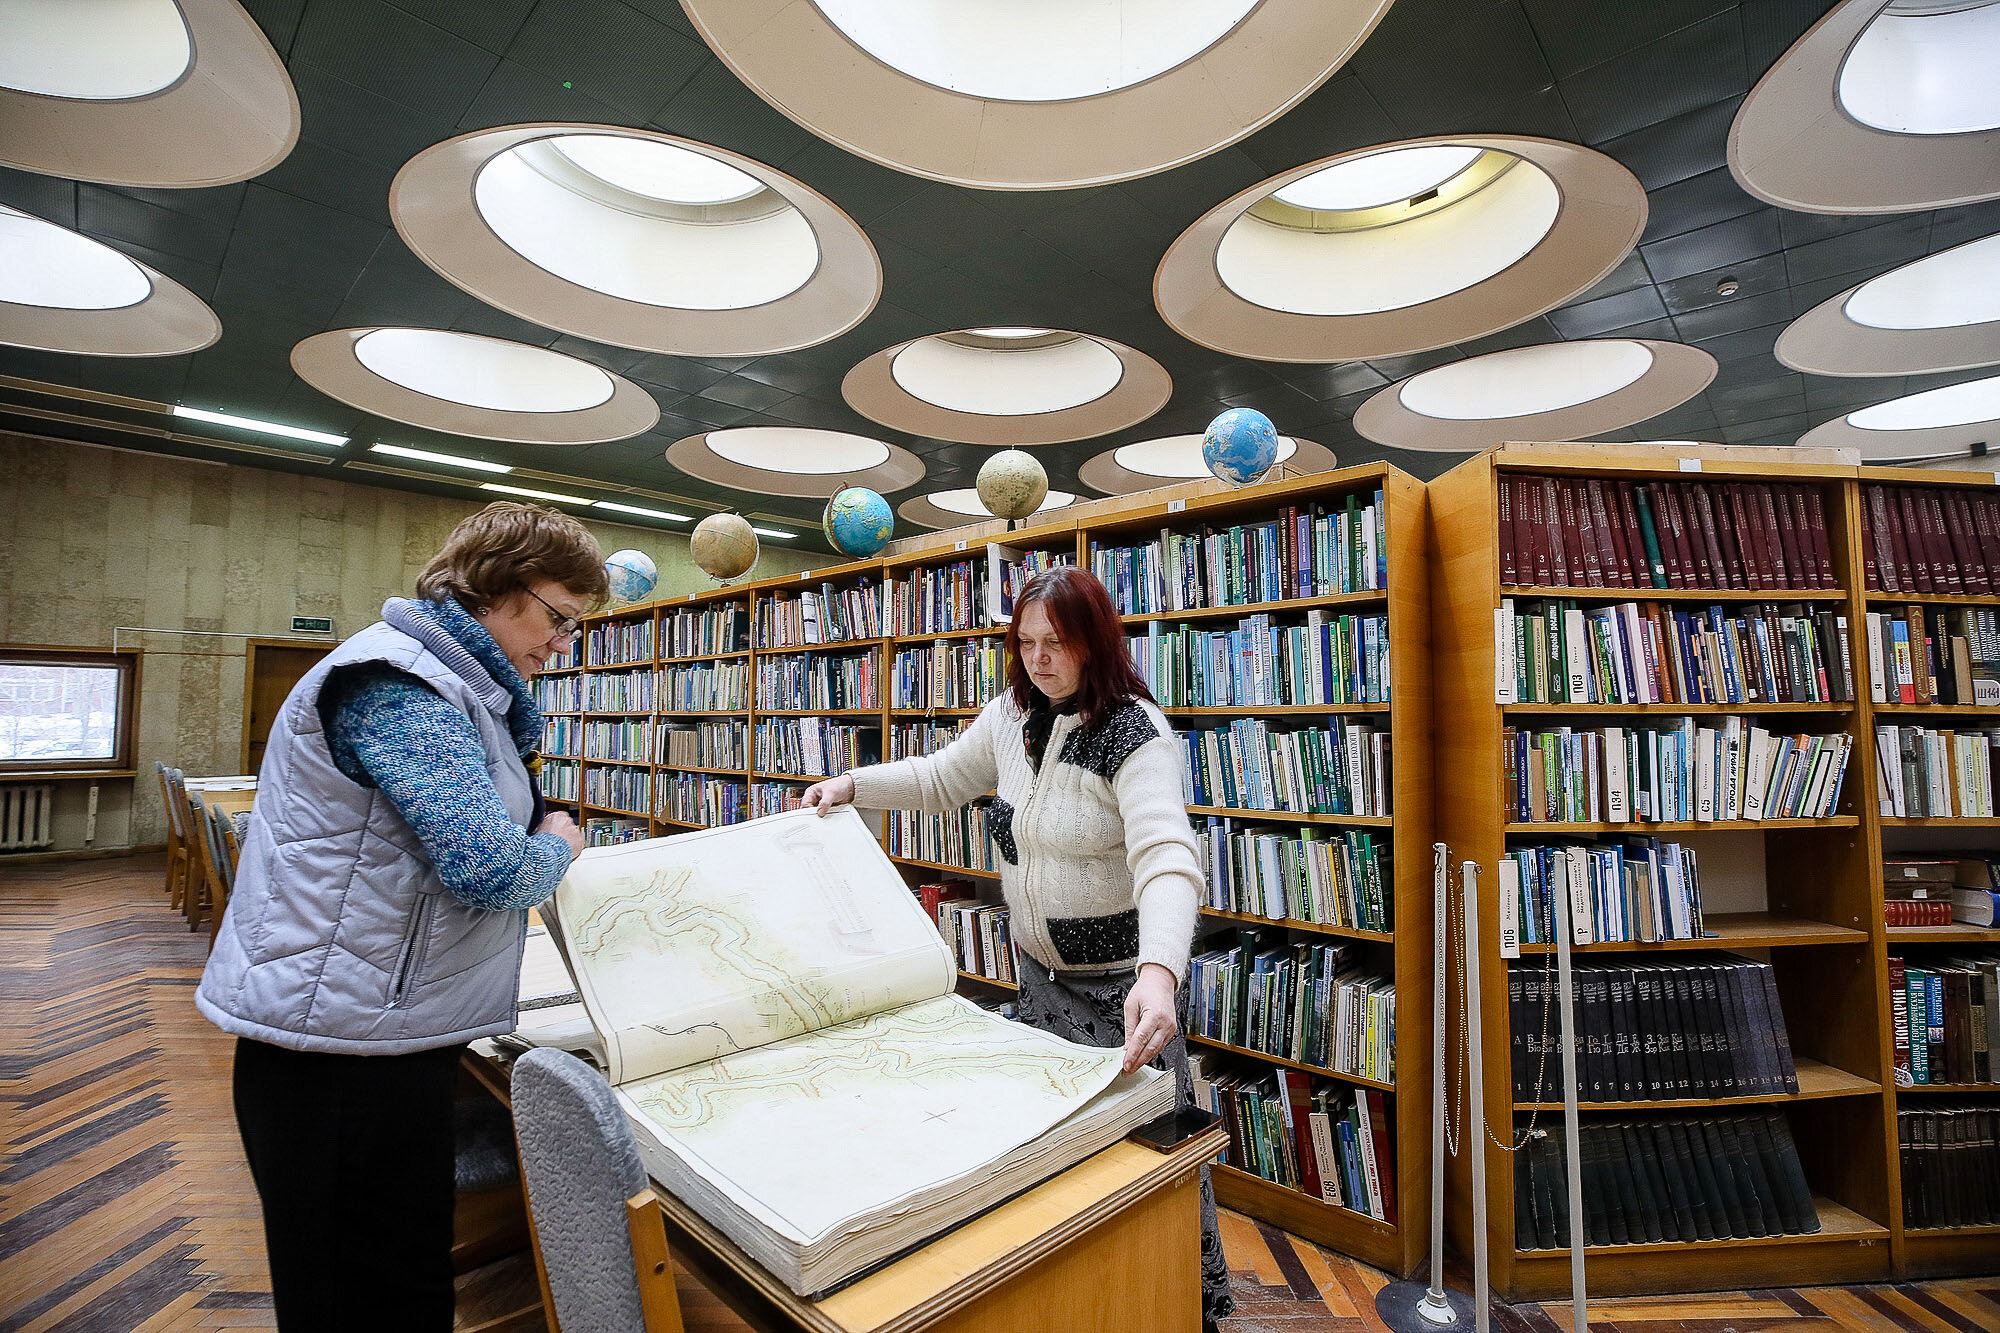 Employees of the Vernadsky National Library show hundreds of years old maps that they look after and exhibit. 